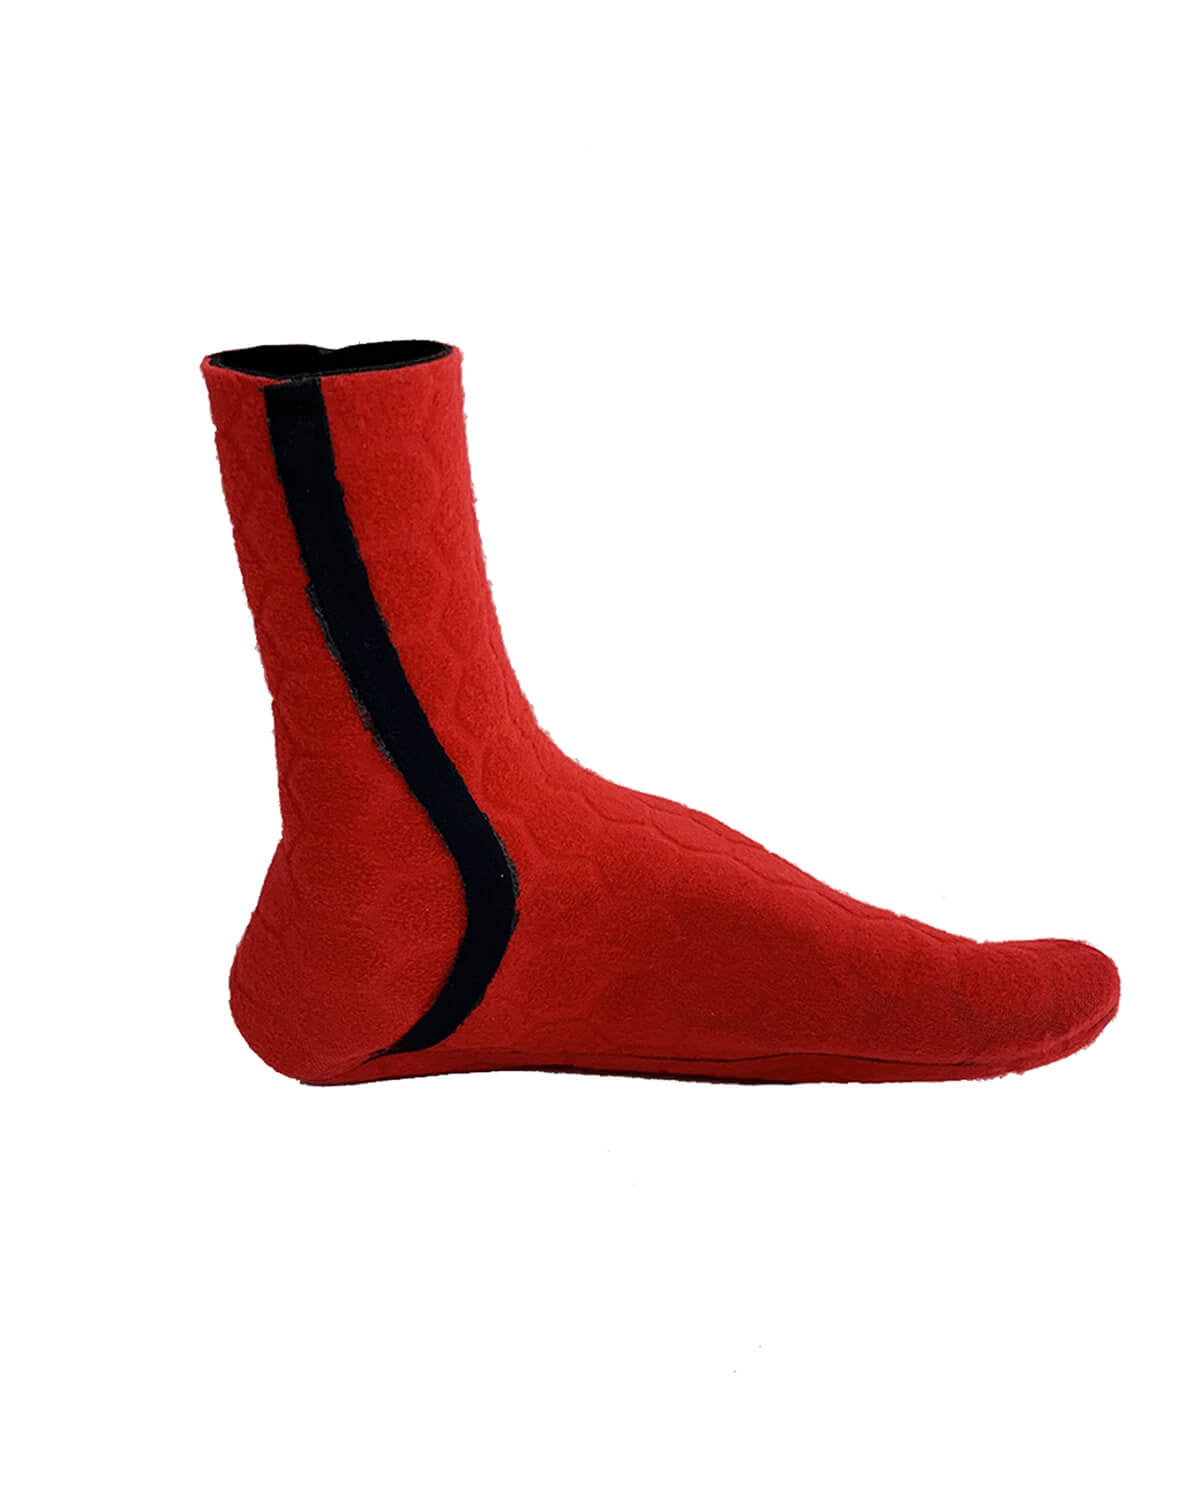 3mm Body Glove RED CELL Split Toe Wetsuit Boots